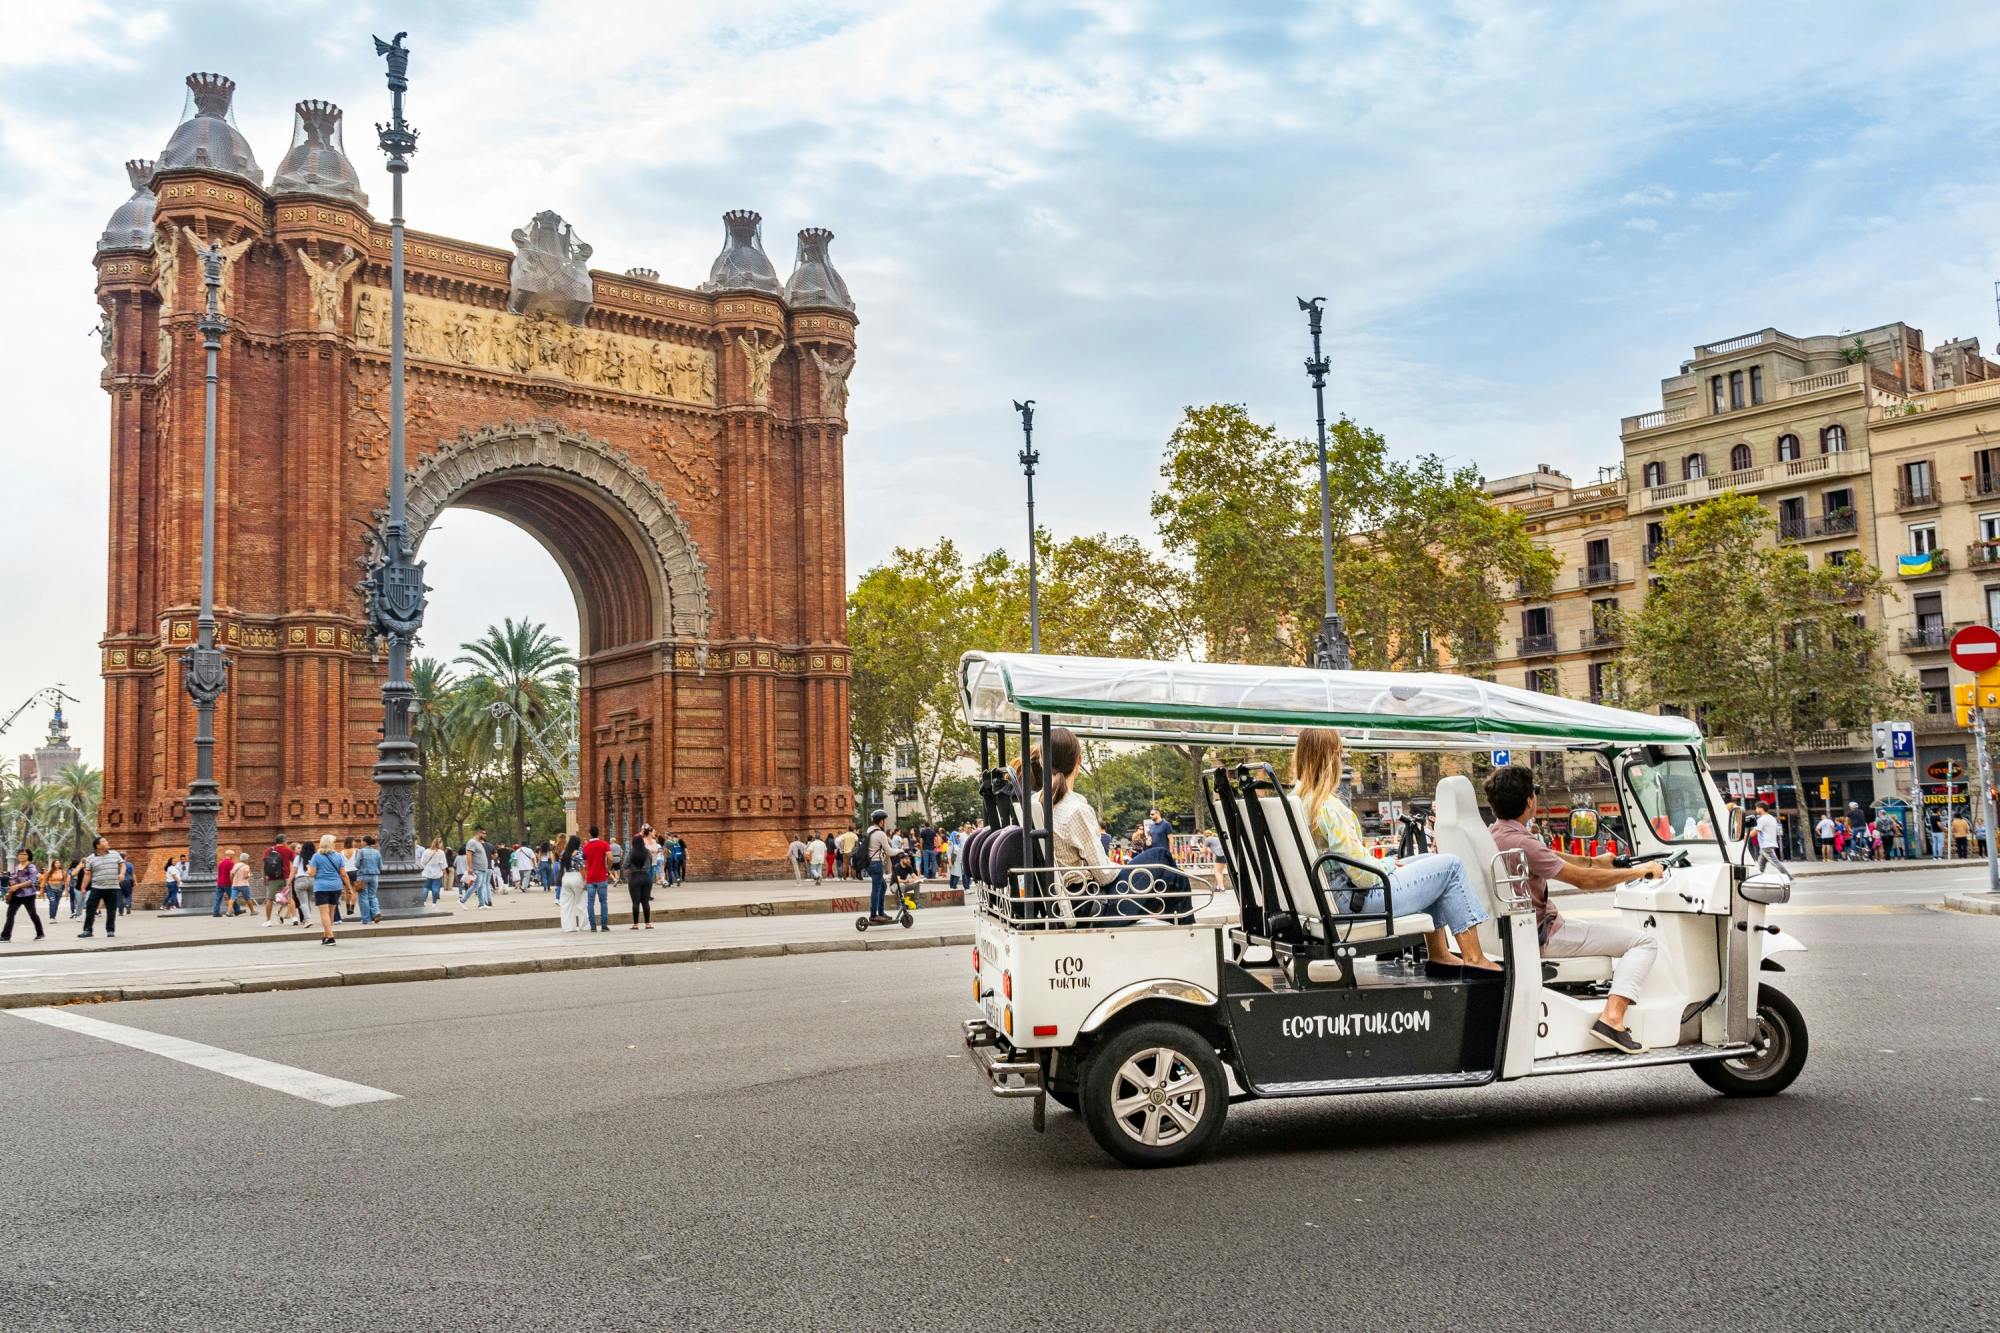 2-hour welcome tour of Barcelona in a private electric tuk-tuk